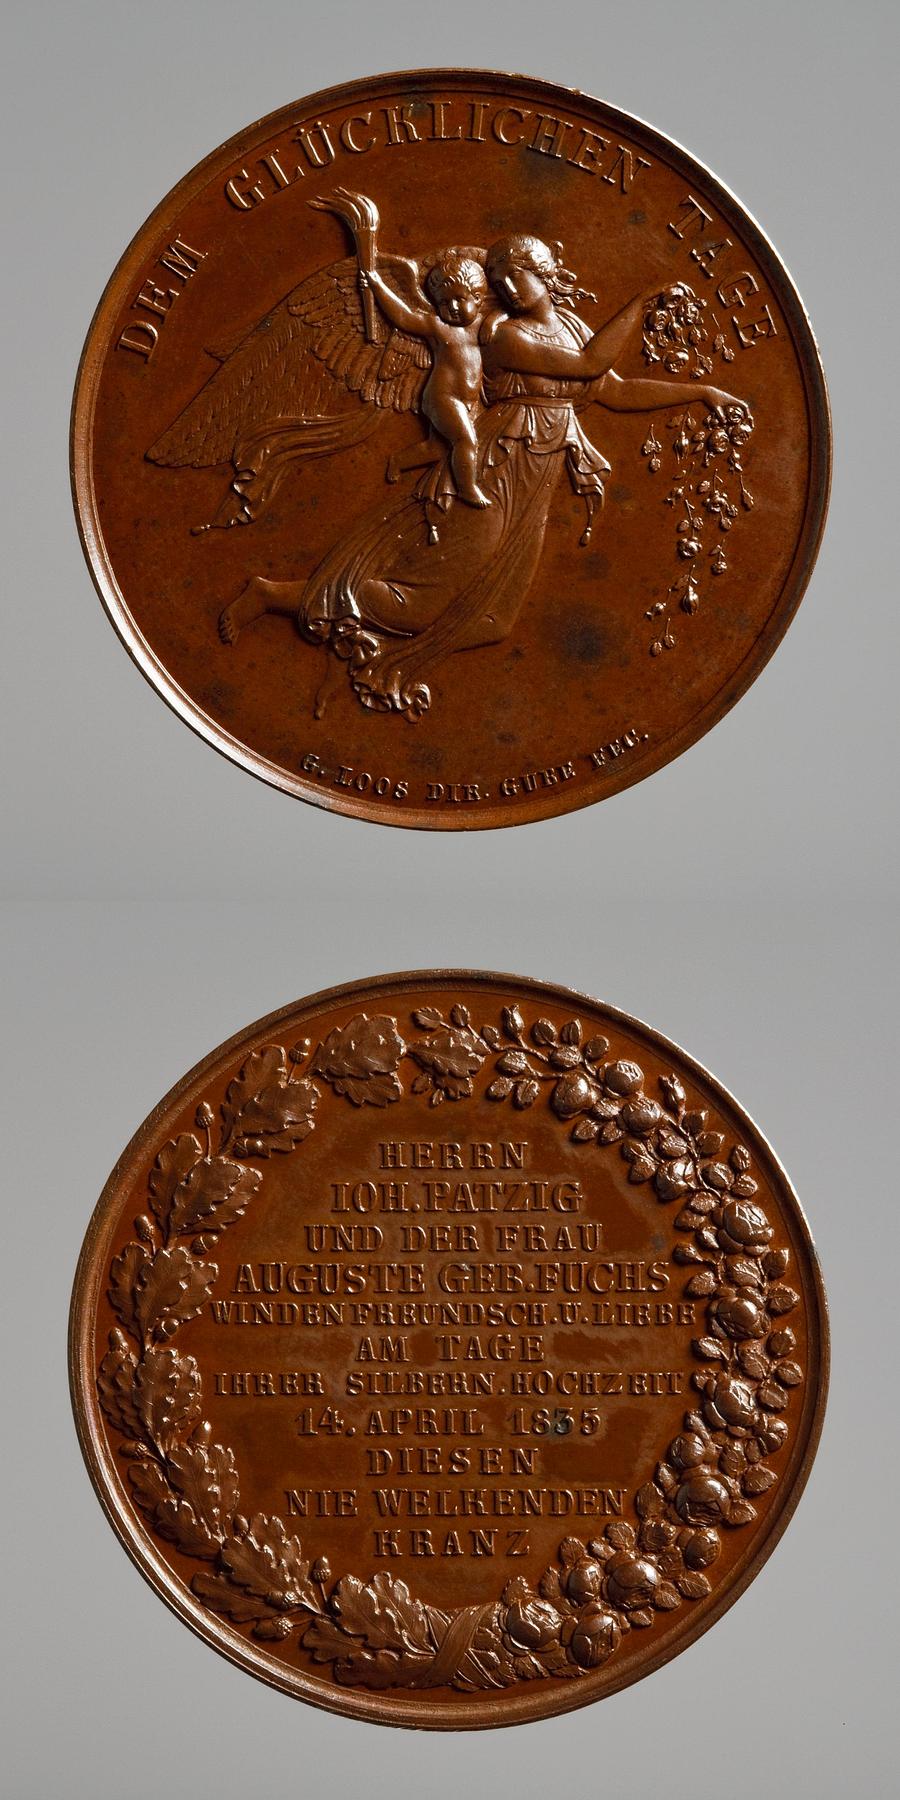 J. Patzig's silver wedding medal, F20